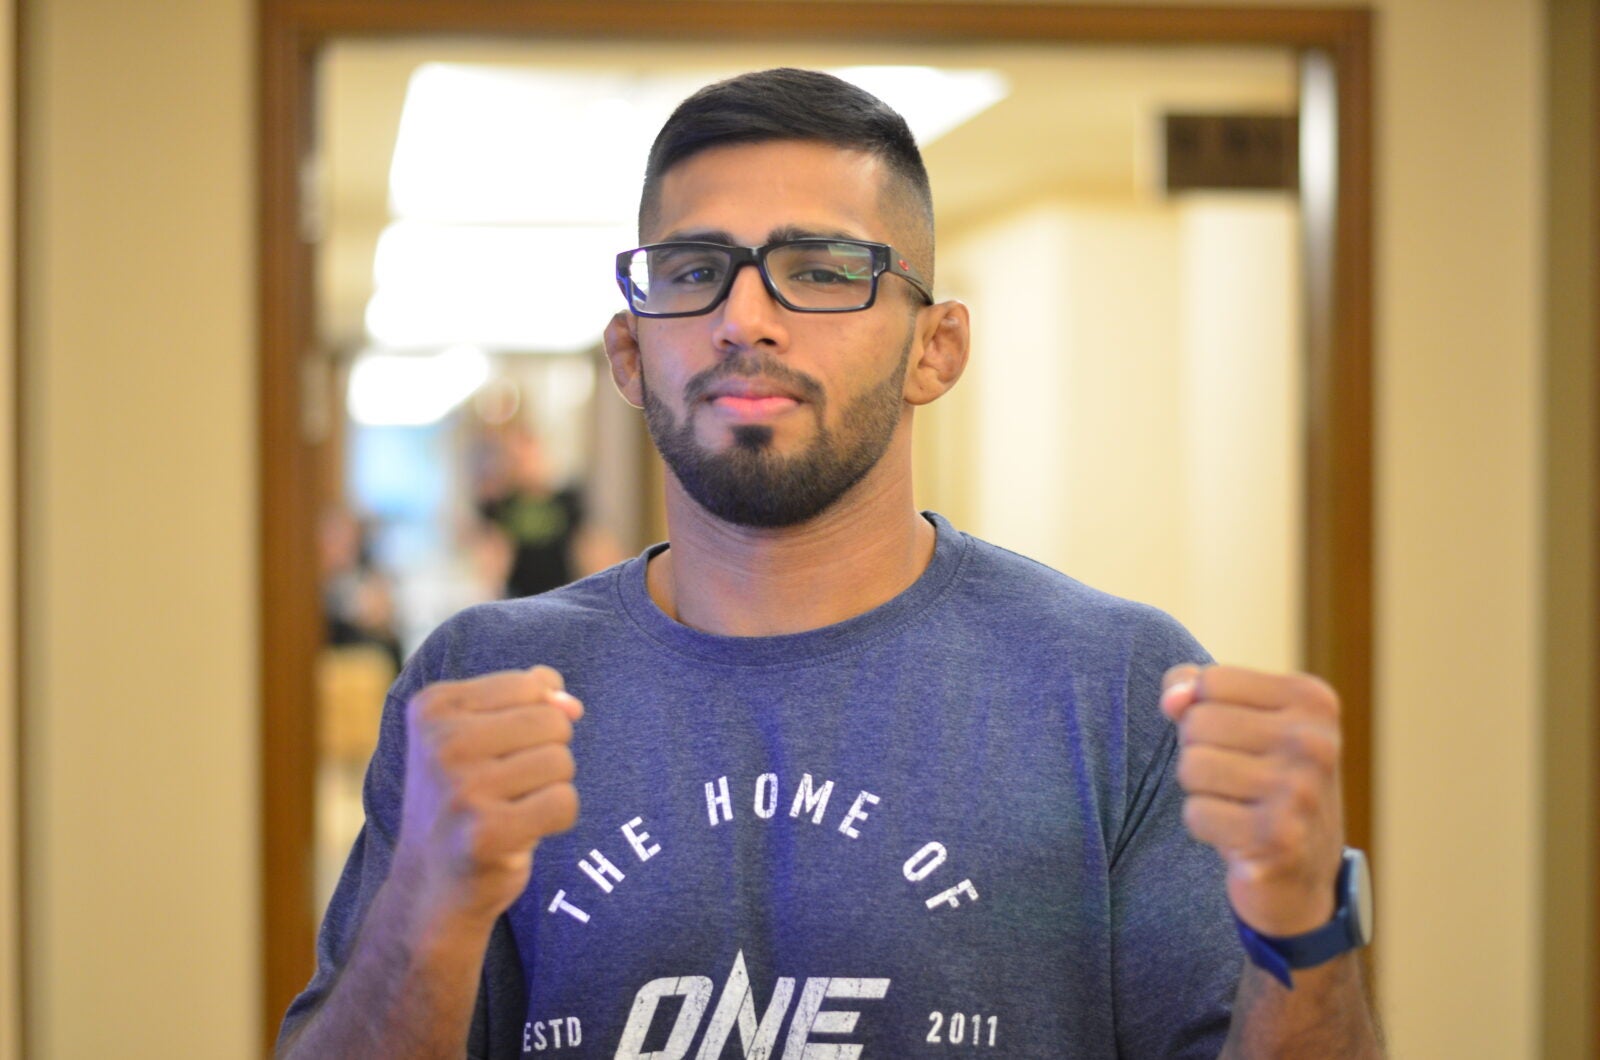 Agilan Thani doing a fighter pose and wearing glasses and a blue shirt